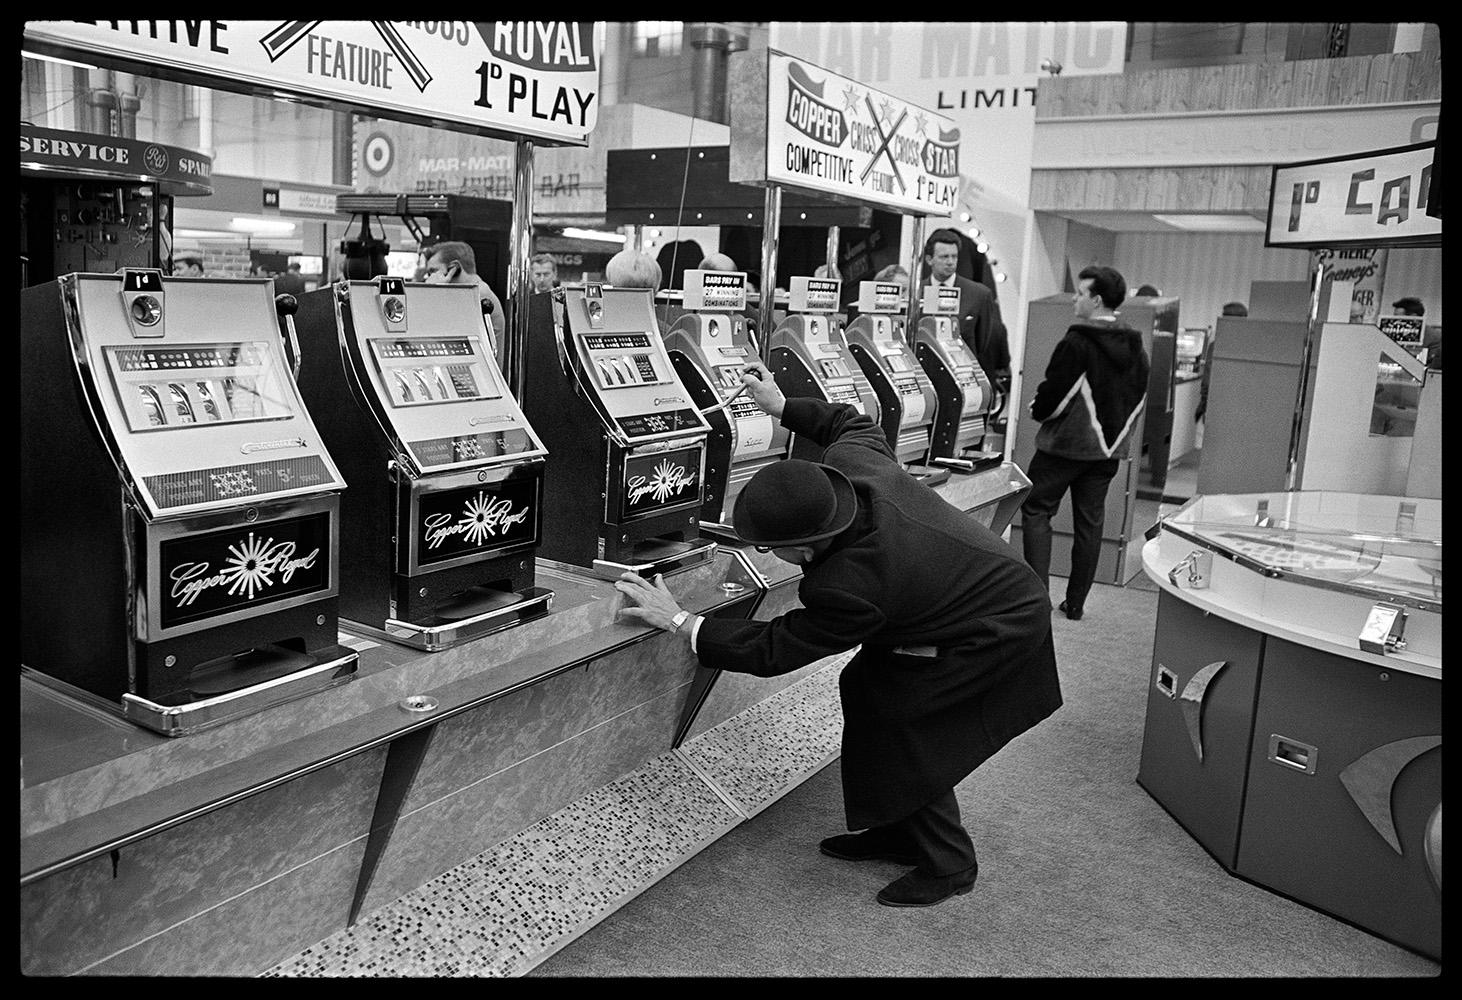 High Roller

By Arthur Steel 

Paper size: 44 x 33.5" / 112 x 85 cm

Silver Gelatin Print
1960 (printed later)
unframed
hand signed
limited edition of 30

note other print sizes and framing options are available, please enquire for